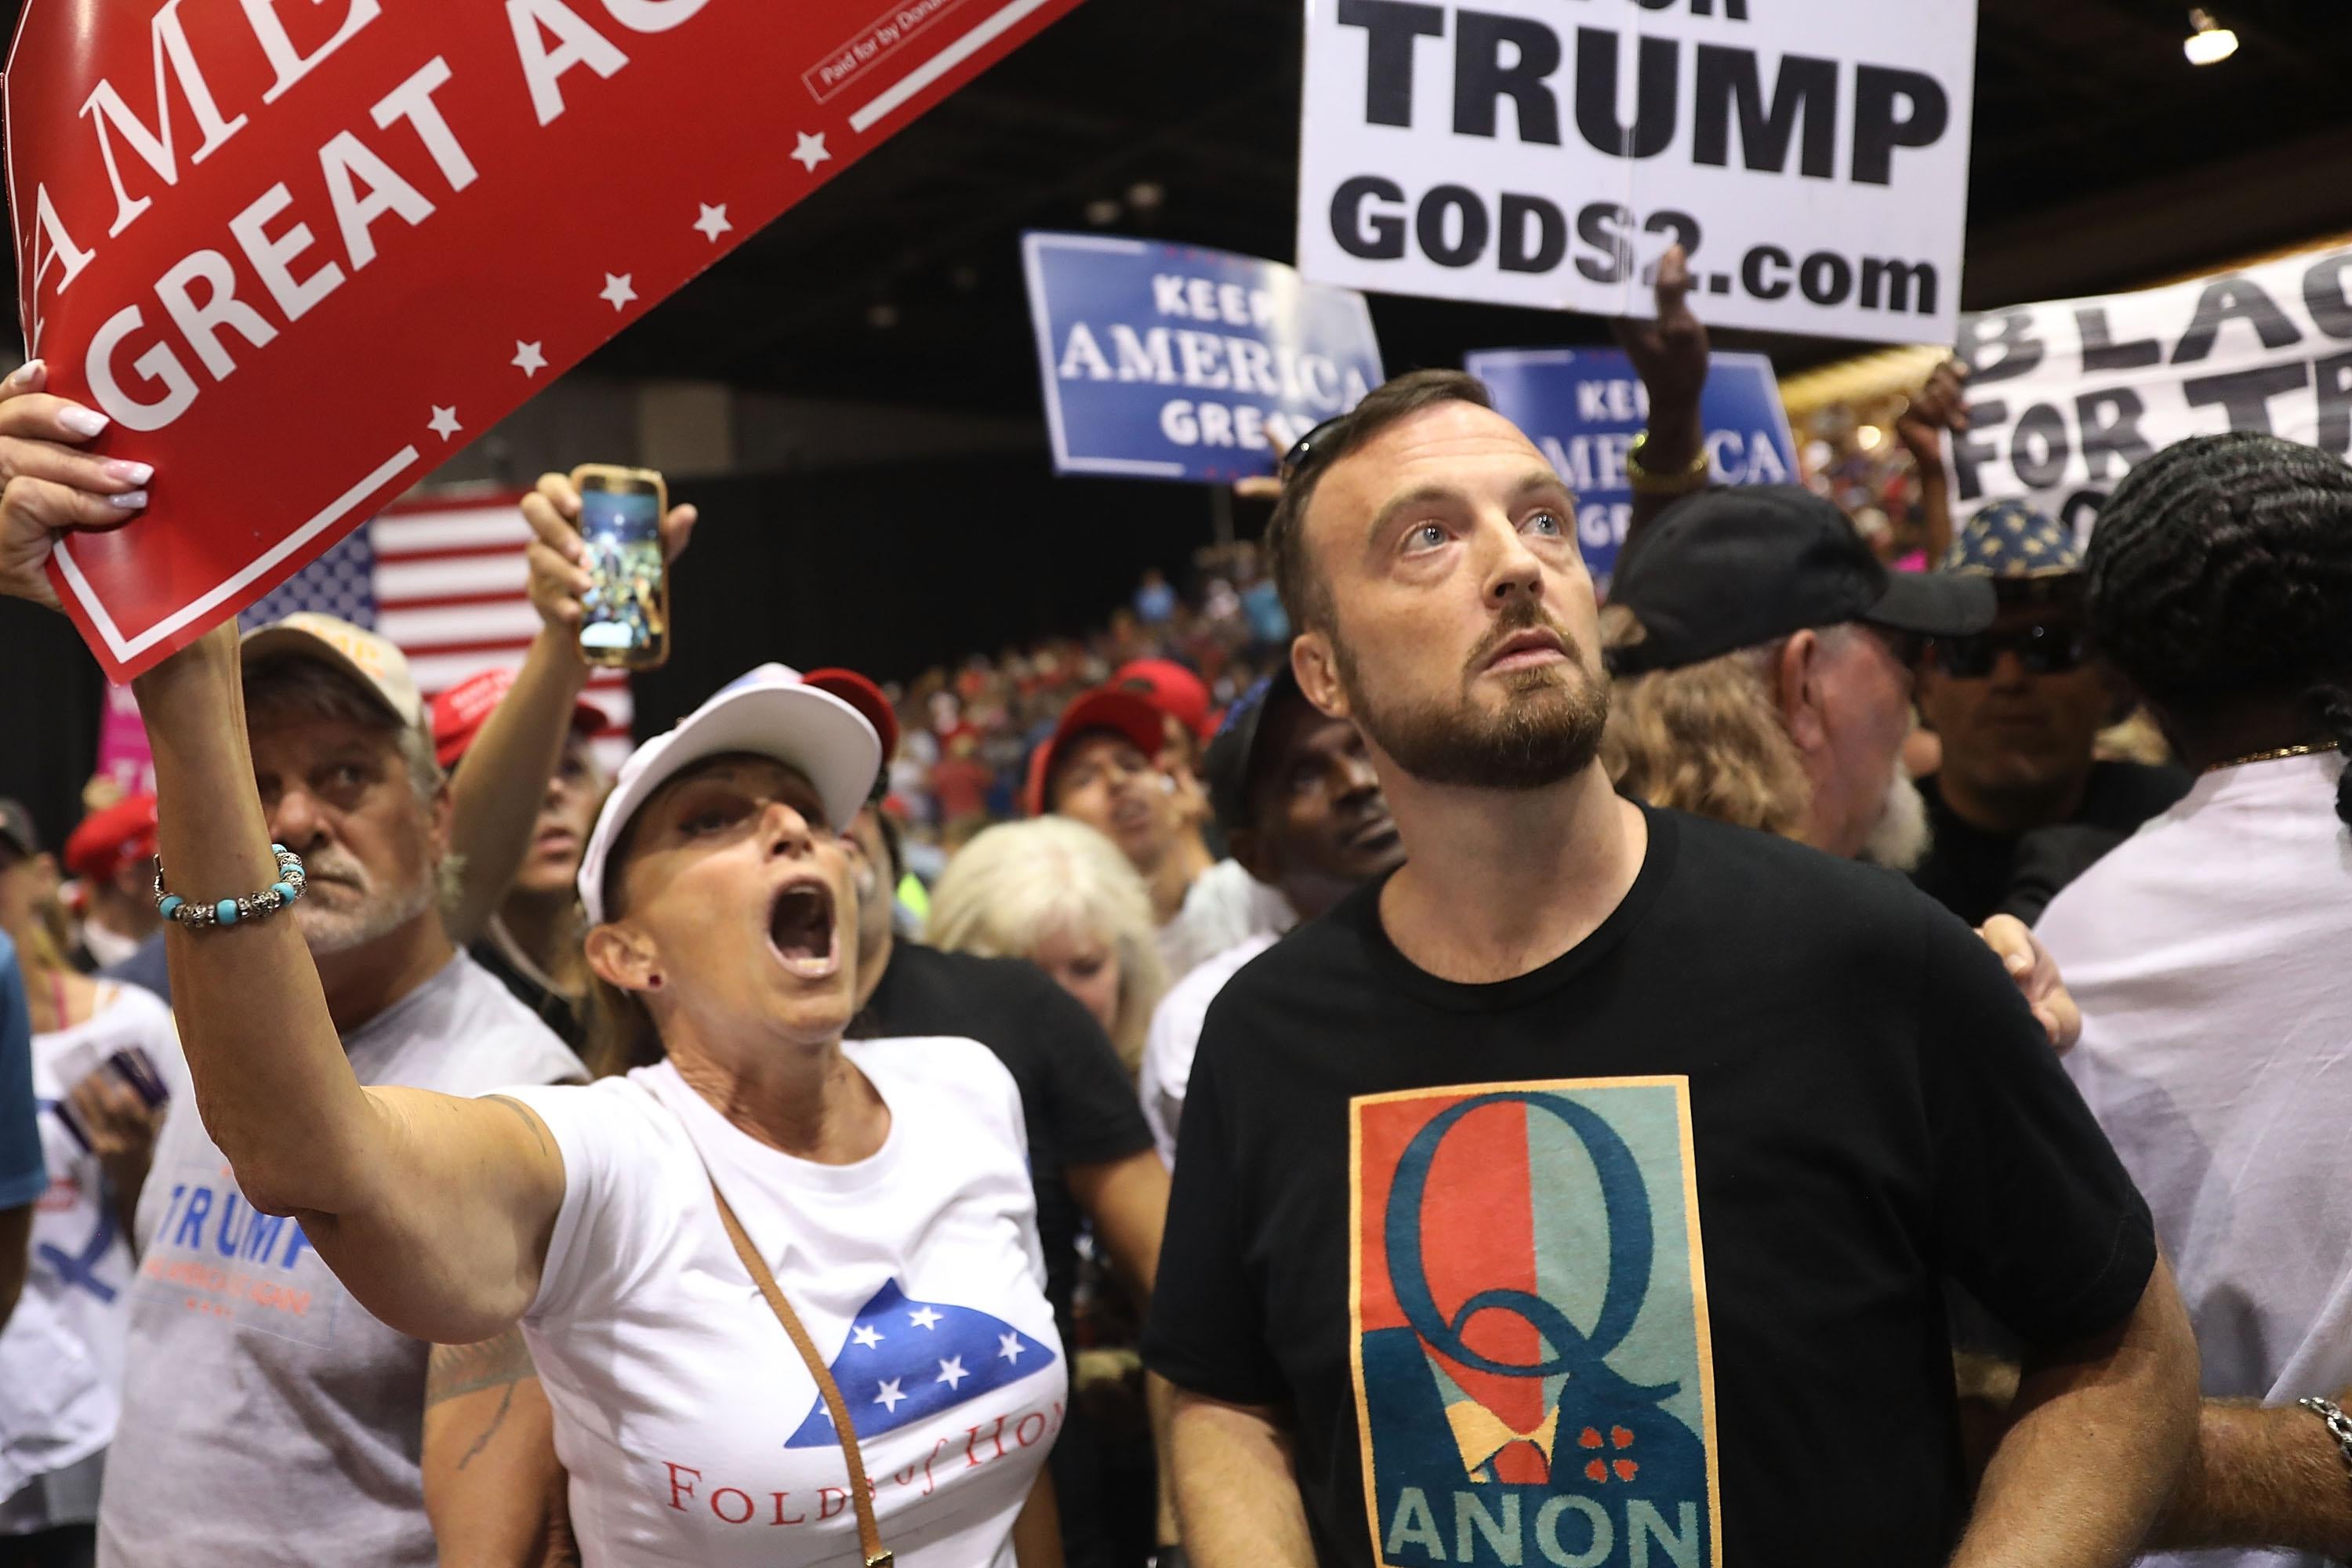 TAMPA, FL - JULY 31:  A man wear a shirt with the words Q Anon as he attends a rally for President Donald Trump at the Make America Great Again Rally being held in the Florida State Fair Grounds Expo Hall on July 31, 2018 in Tampa, Florida.  Some people attending either wore shirts with a Q or held signs with a Q and are reported to be part of a conspiracy theory group.  (Photo by Joe Raedle/Getty Images)